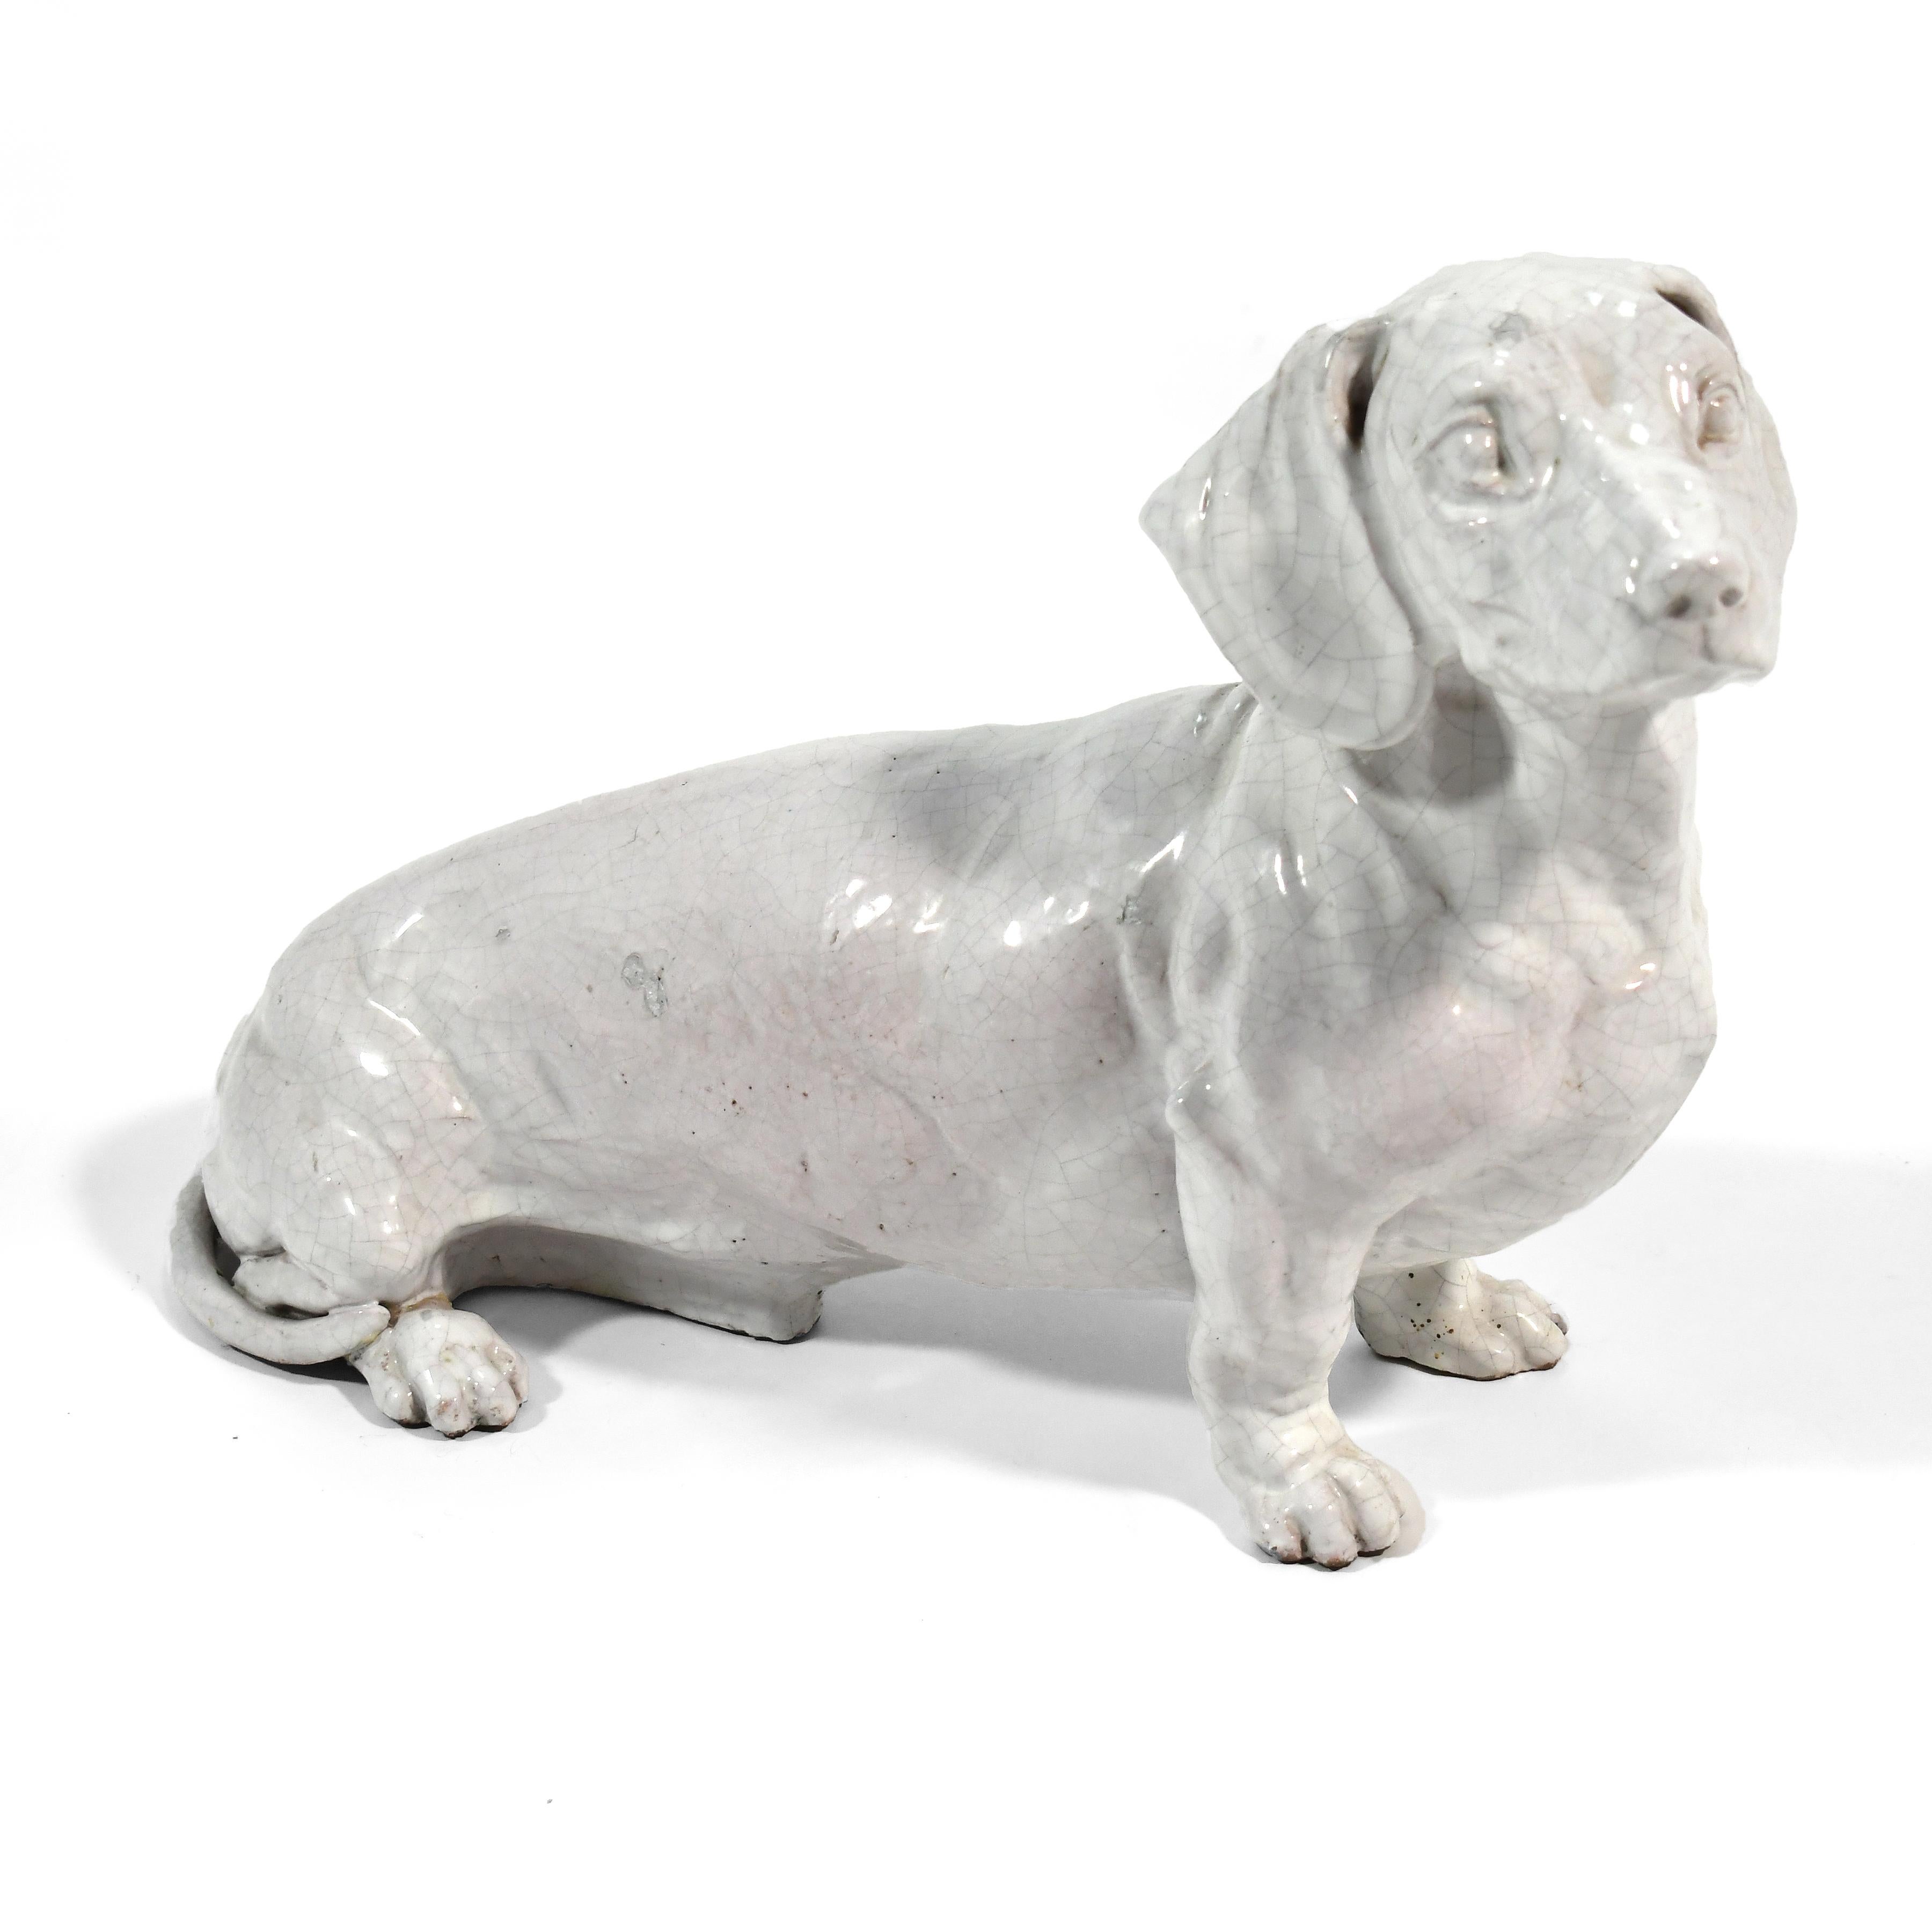 This charming Dachshund rendered in ceramic with a raku glaze has great presence with his stark white monochromatic finish. Very similar in style to a design by Ugo Zaccagnini

14